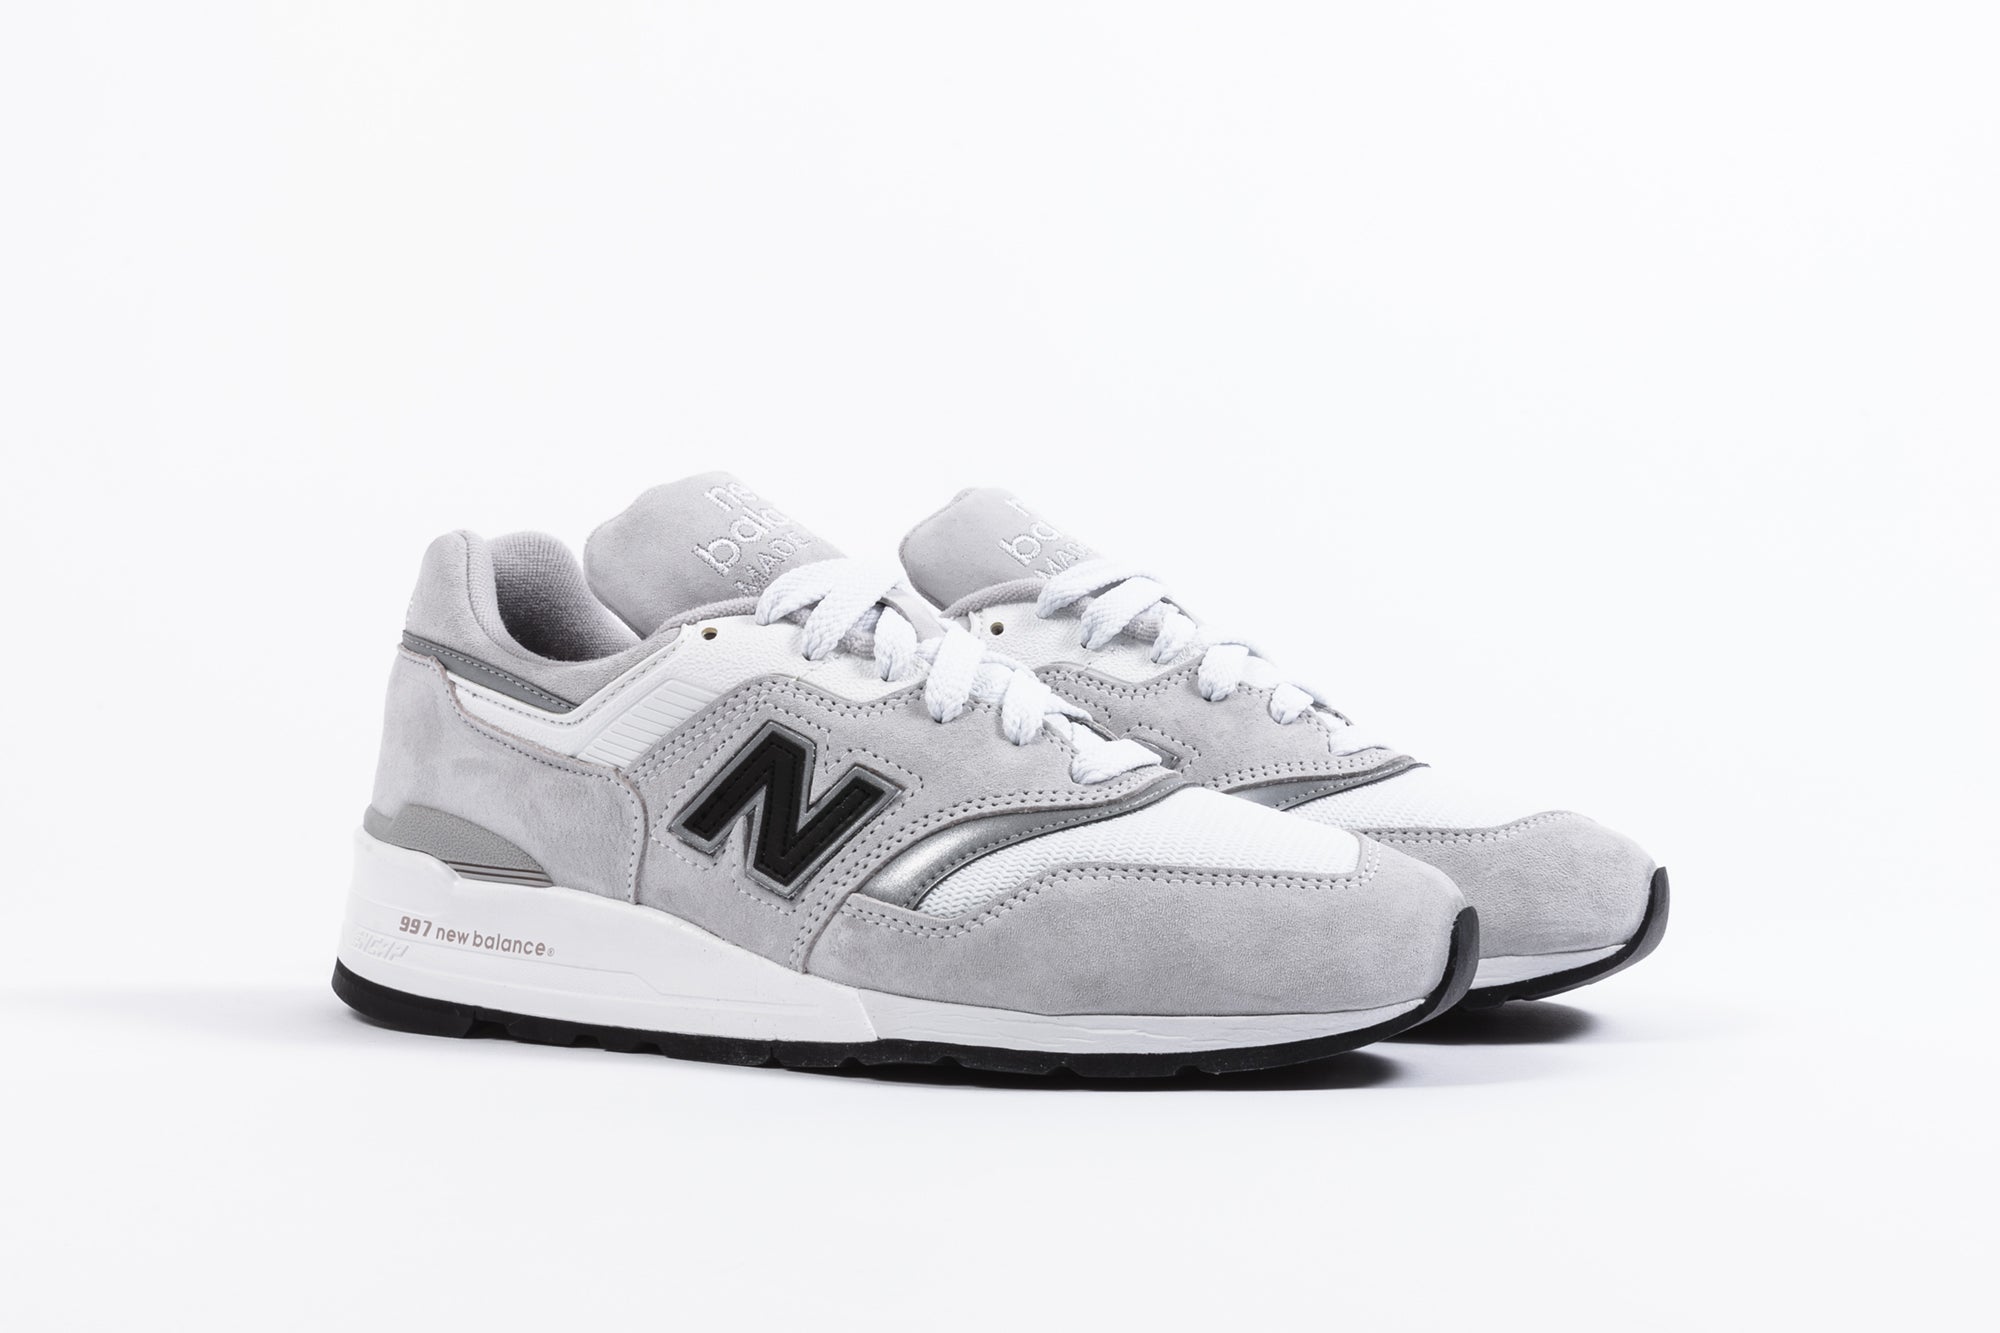 new balance outlet philippines xxl - 62% OFF - plykart.com